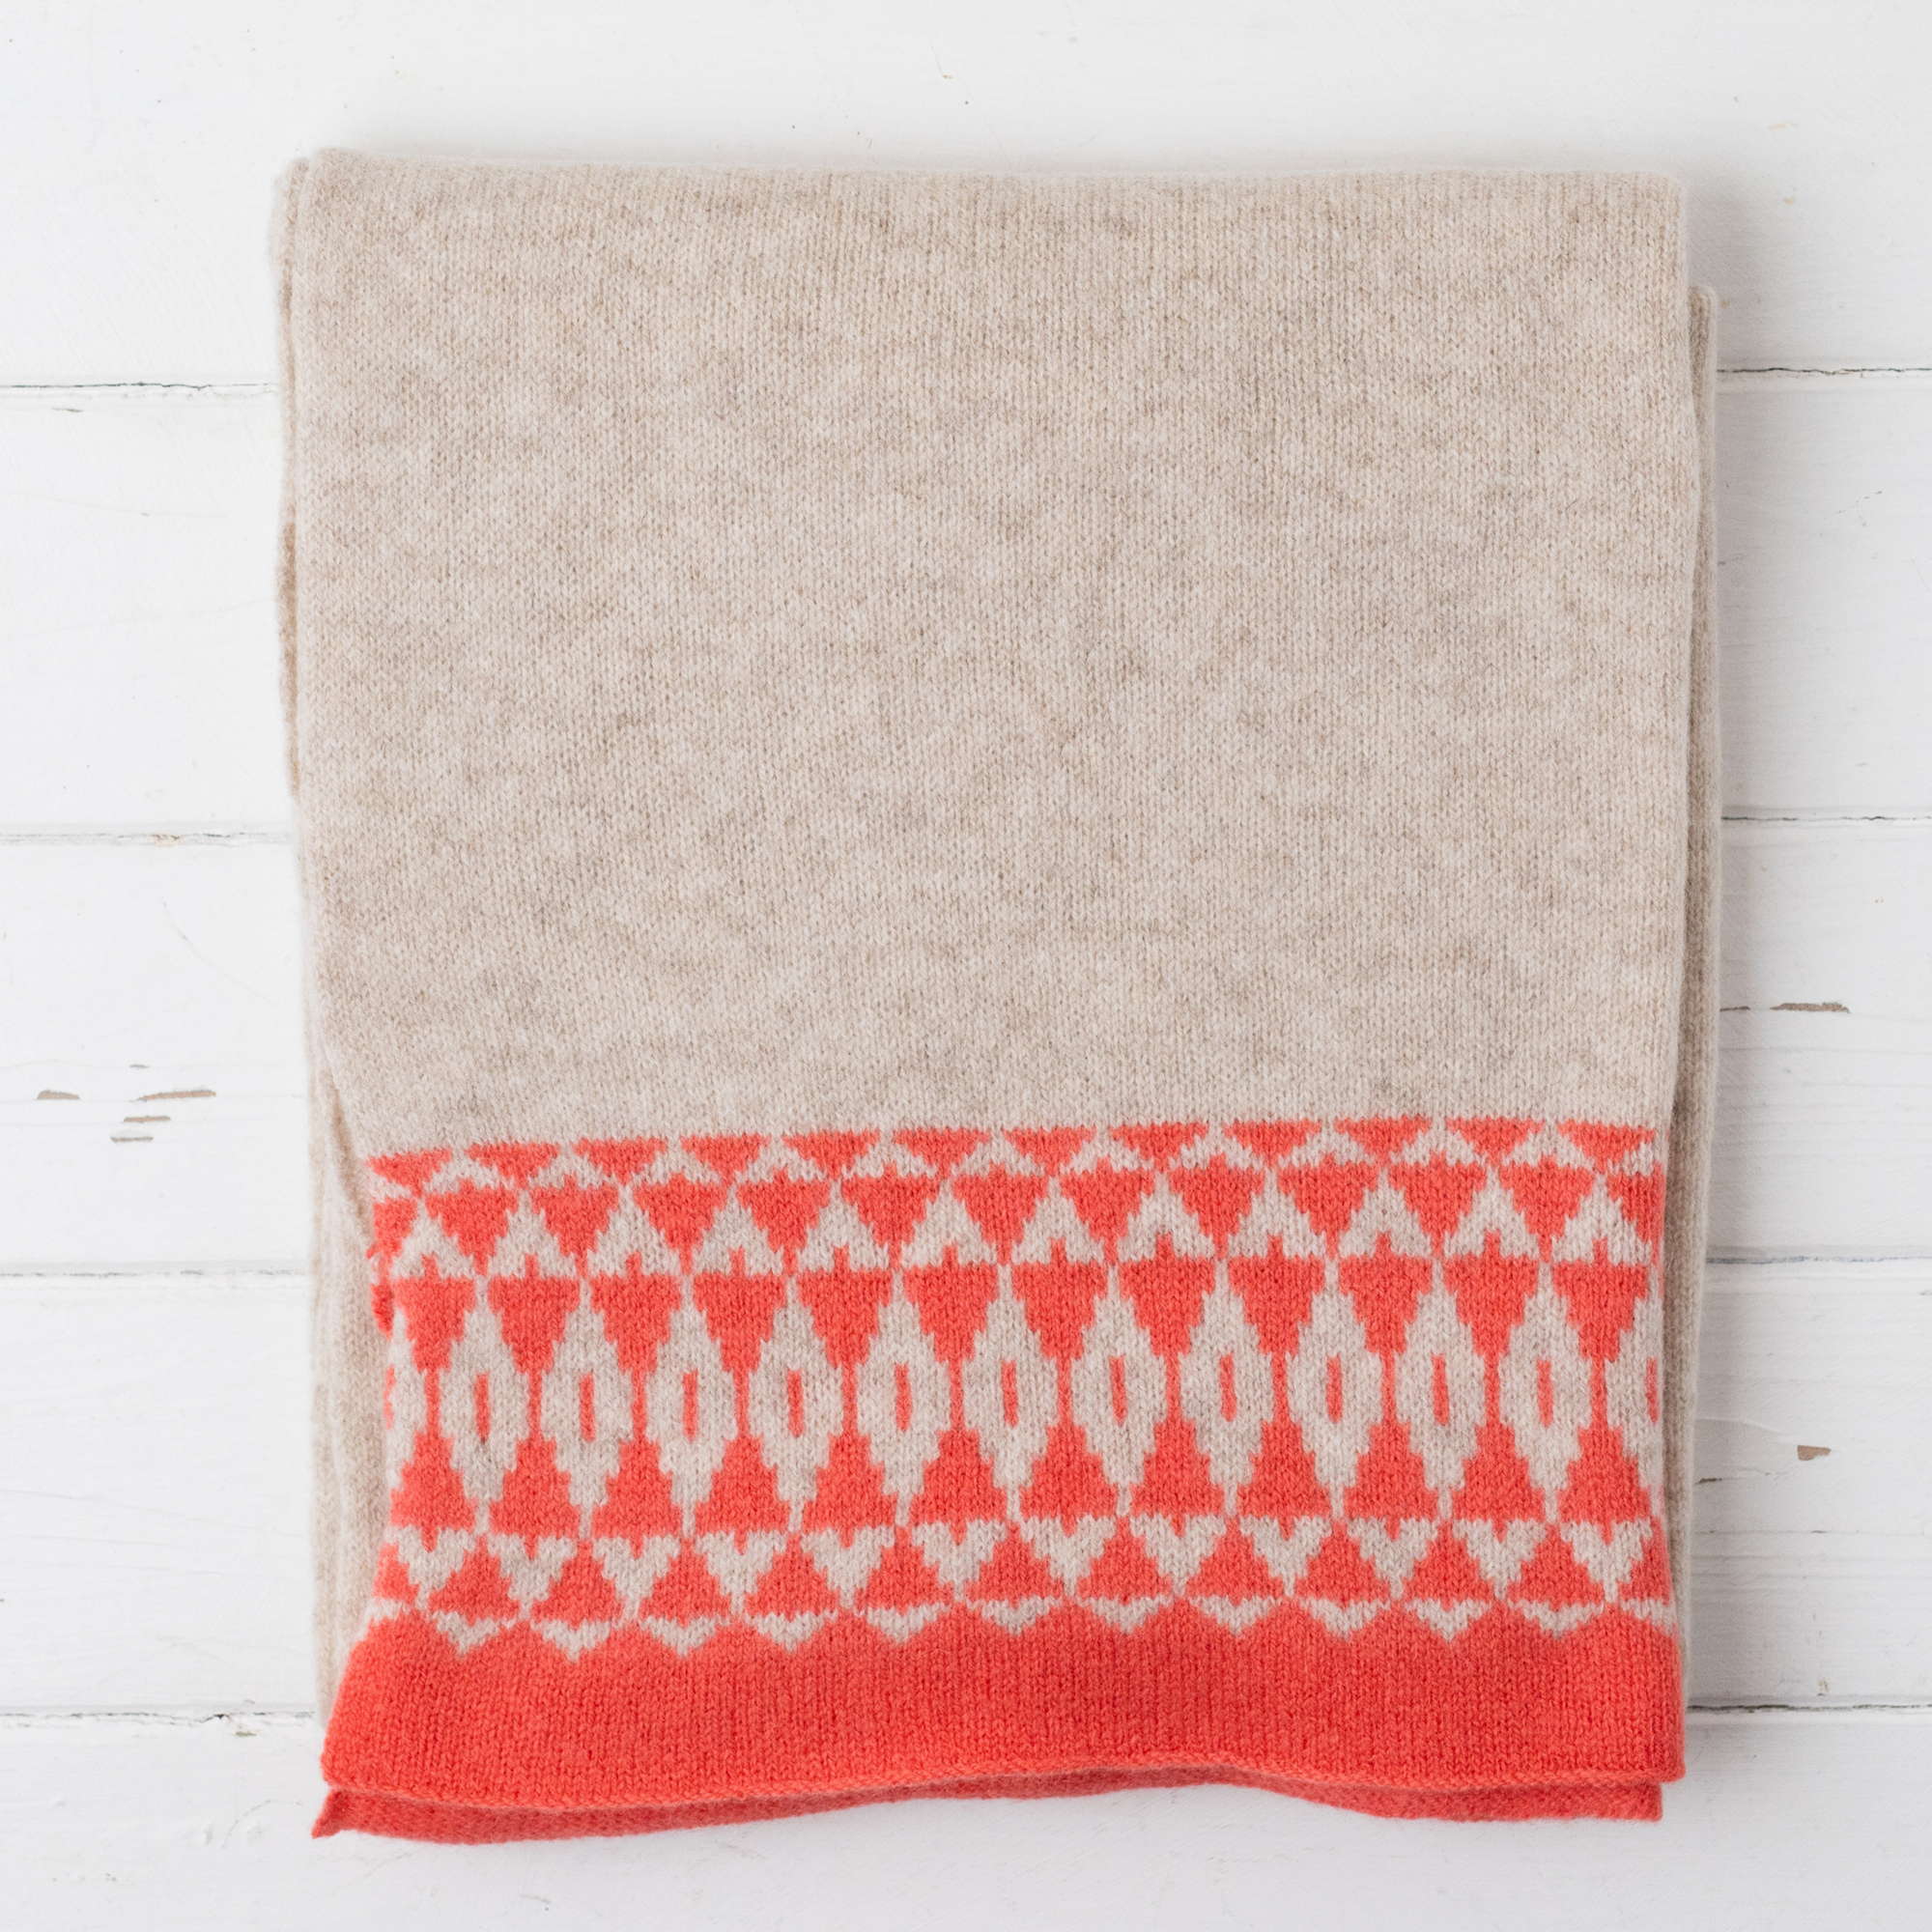 Mirror knitted wrap - coral and linen